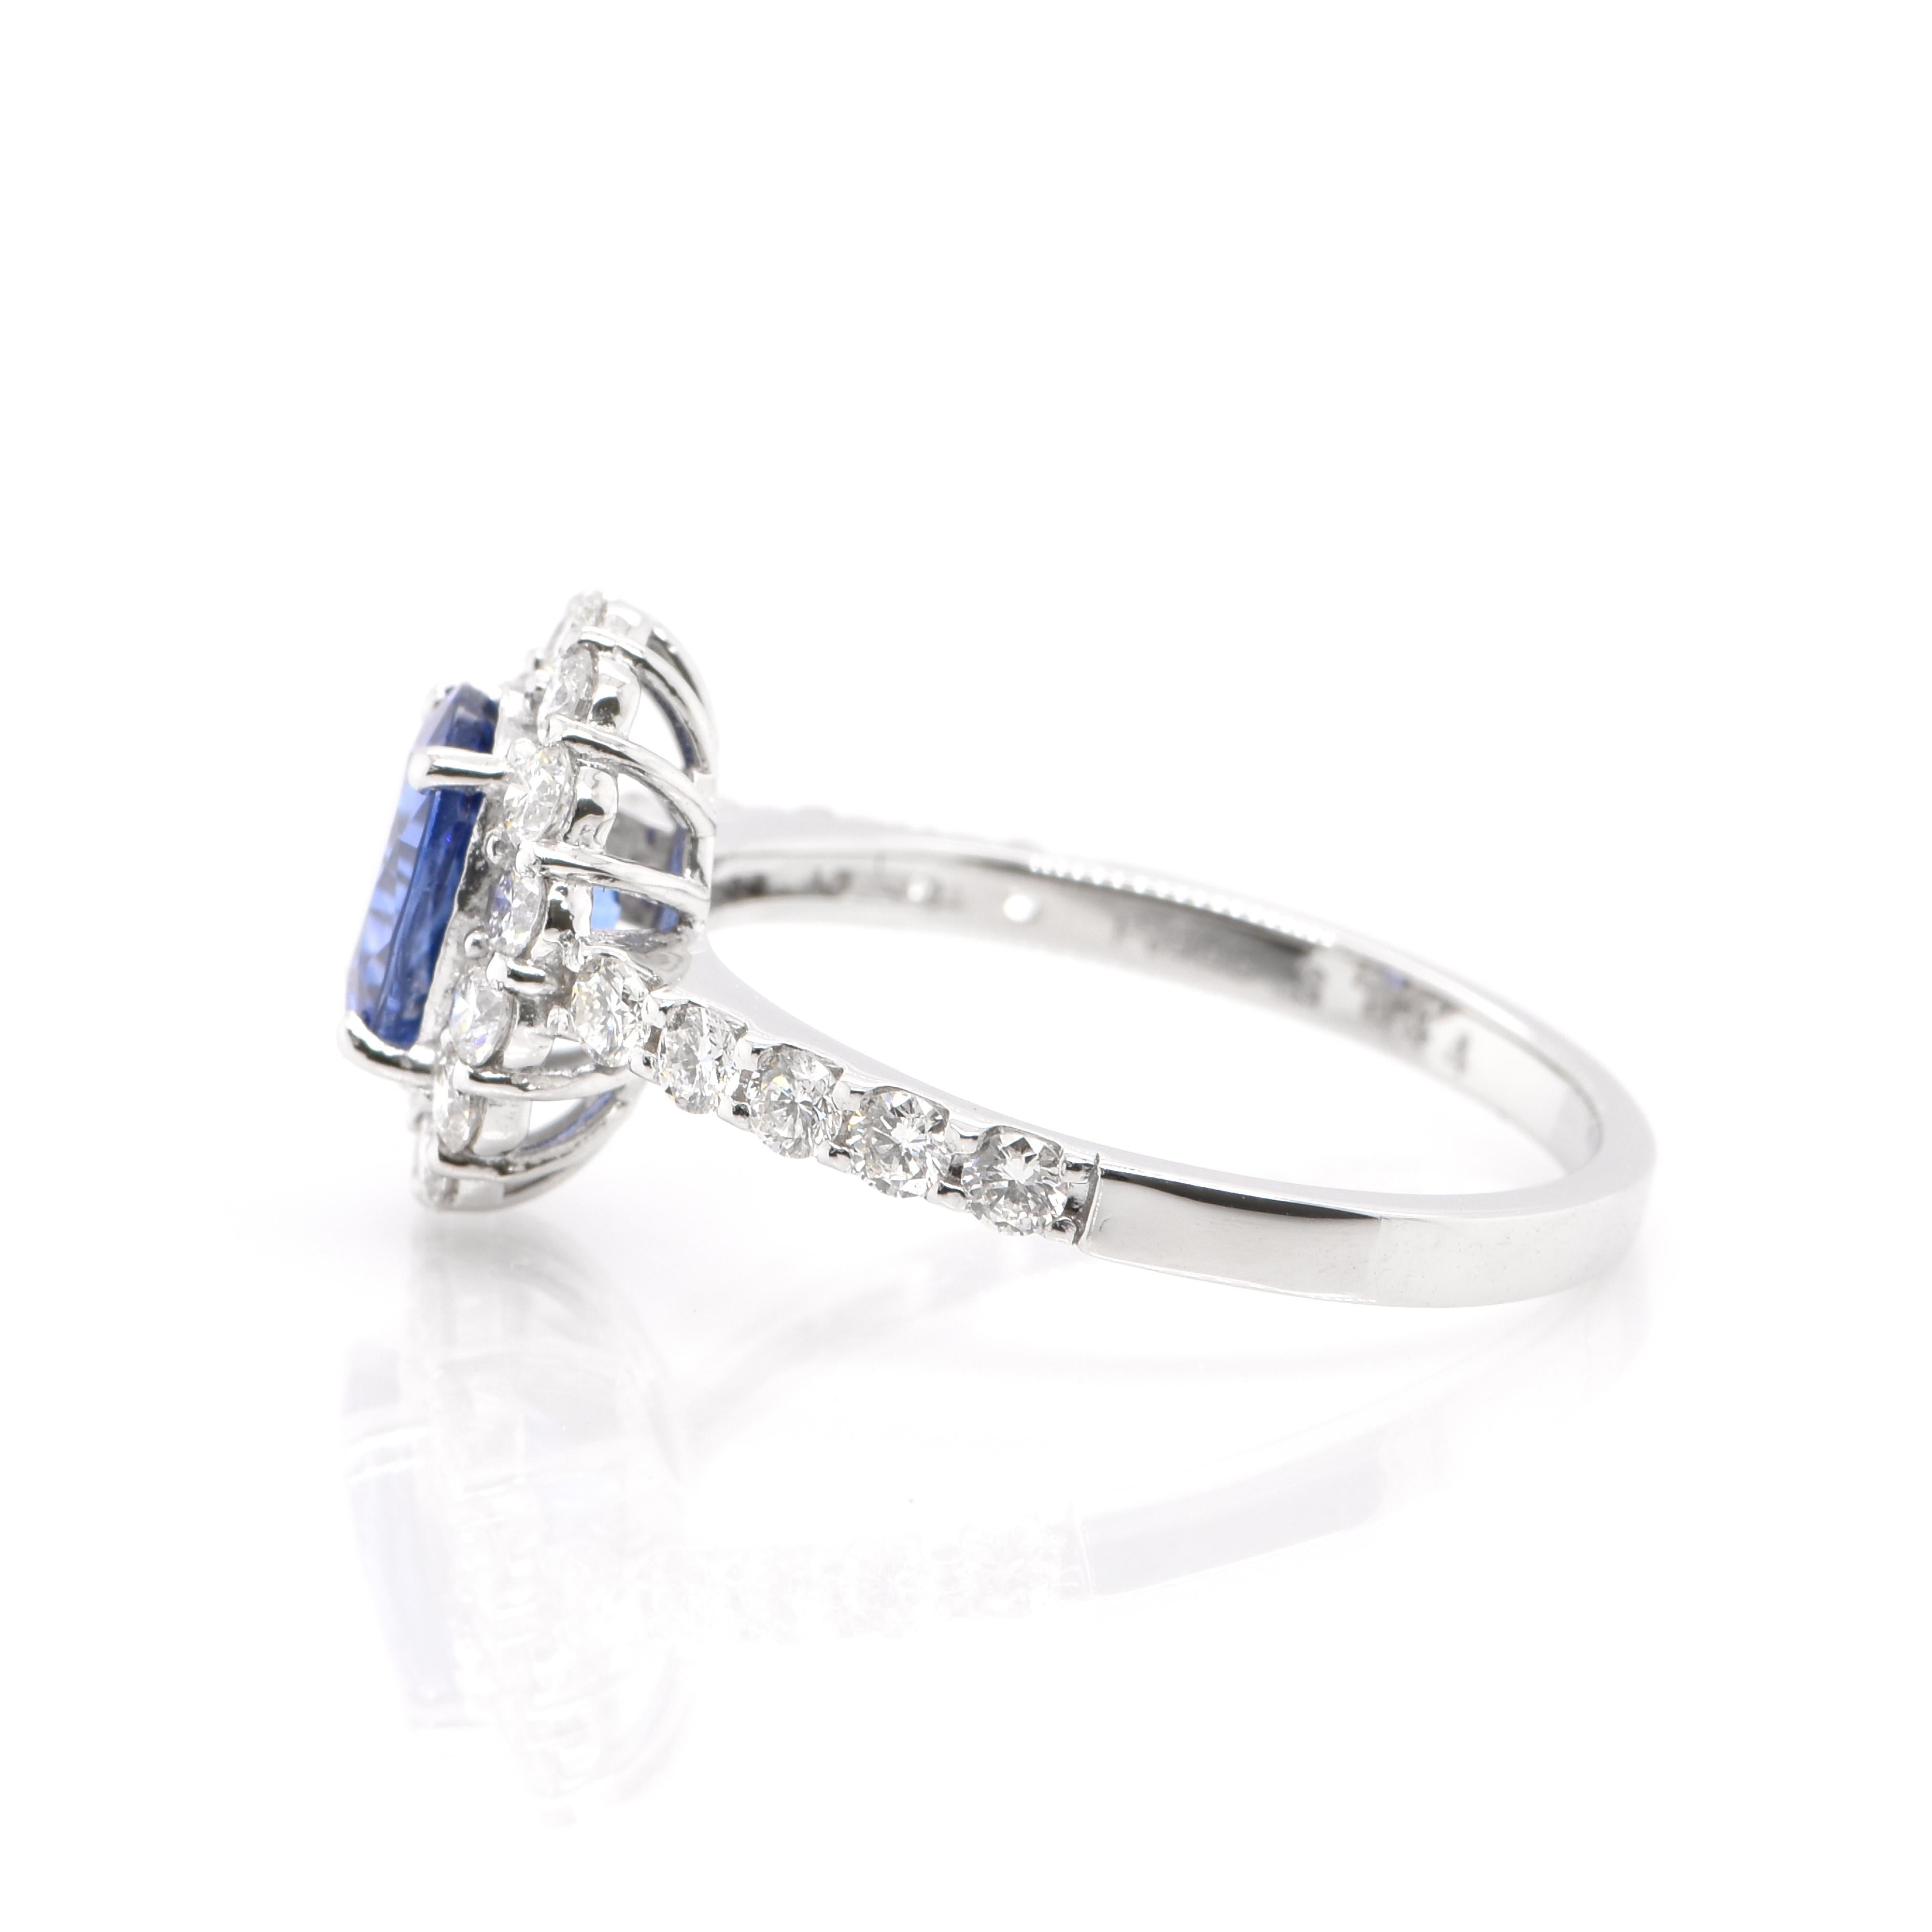 Oval Cut 1.44 Carat, Natural Sapphire and Diamond Diana-Style Ring set in Platinum